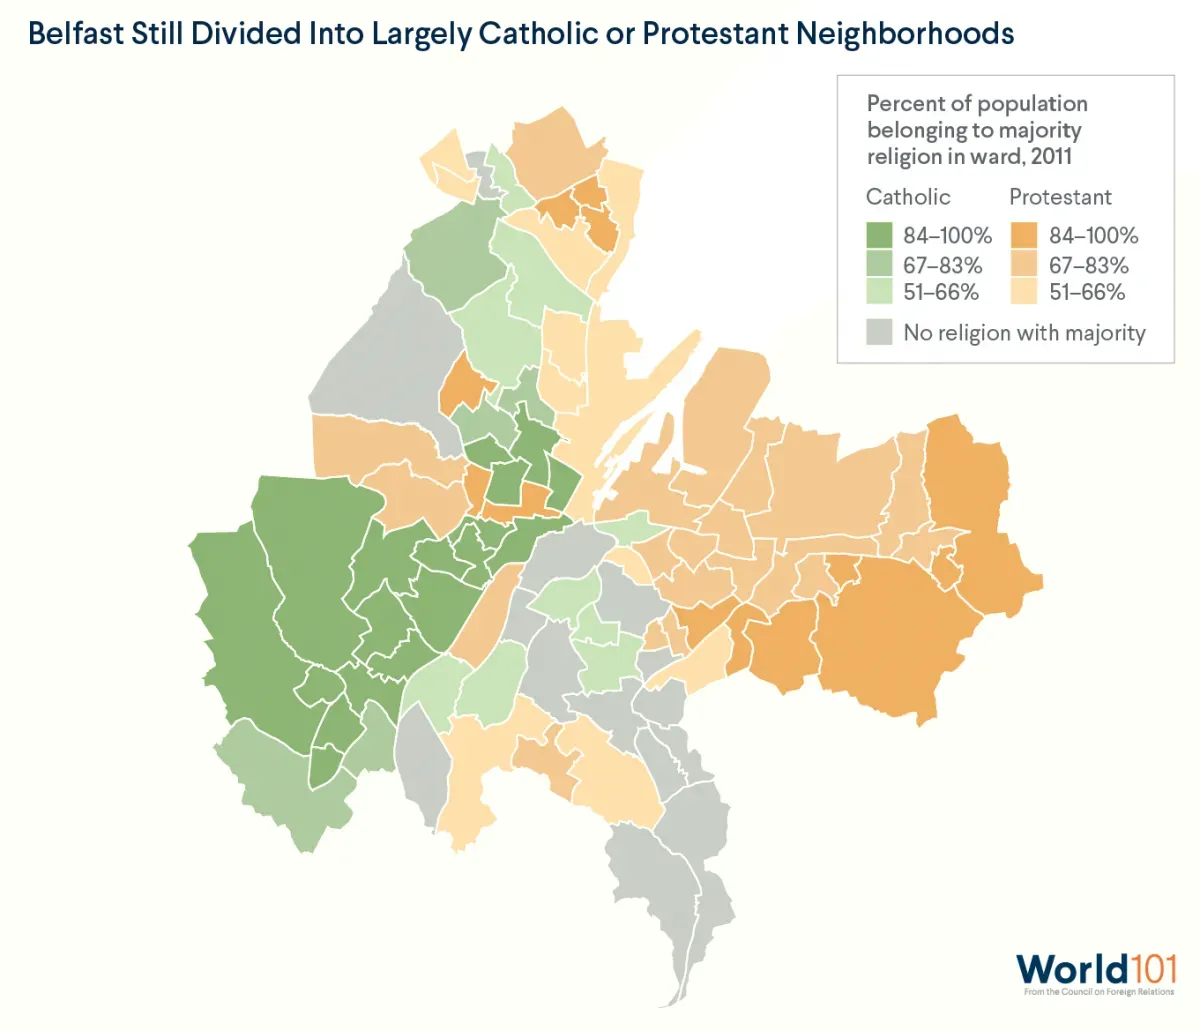 Map showing how, as of 2011, Belfast was still largely divided into largely Catholic or Protestant neighborhoods.